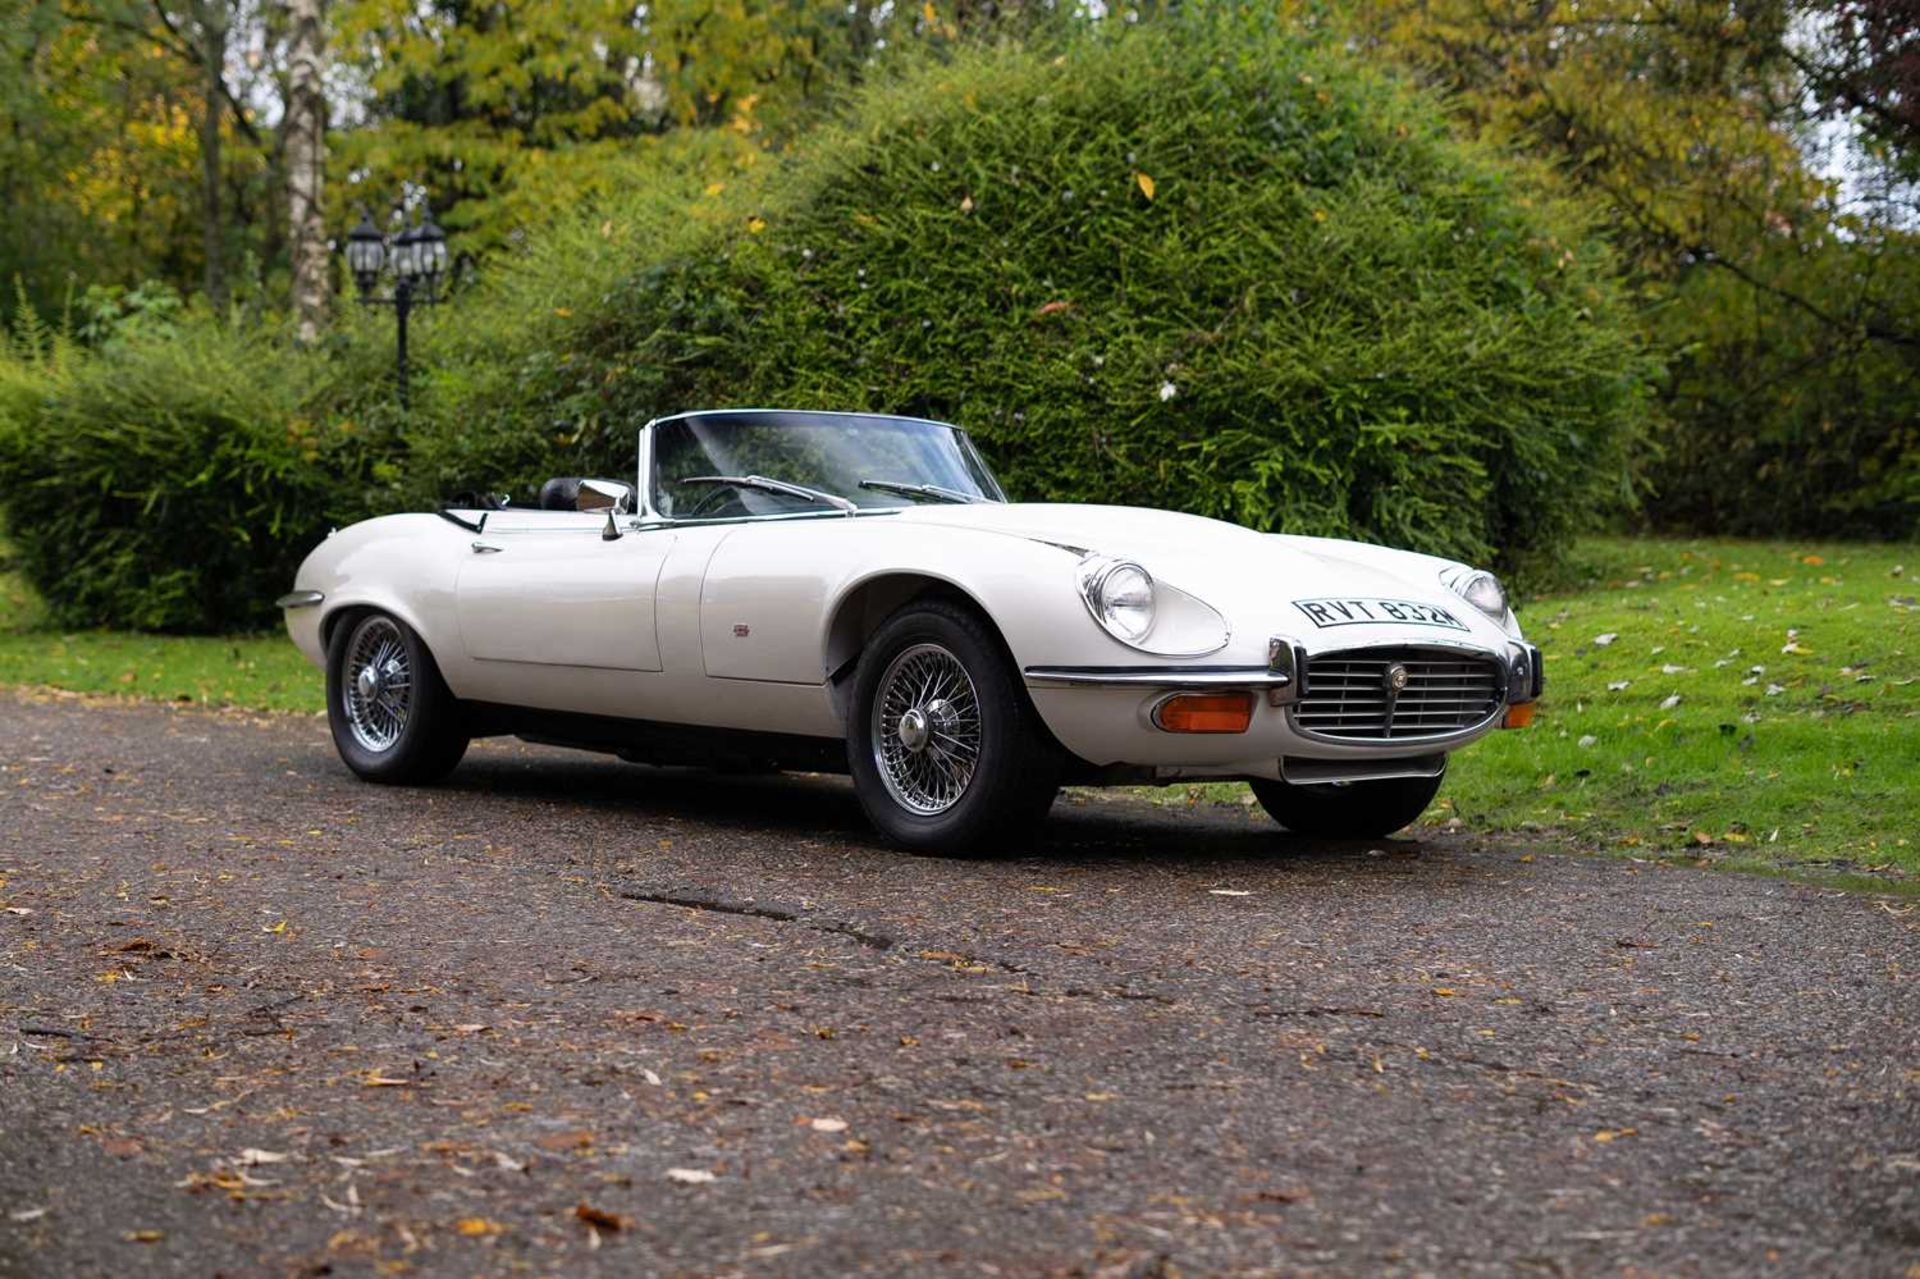 1973 Jaguar E-Type Roadster  A credible 37,000 mile right-hand drive, home market example, specified